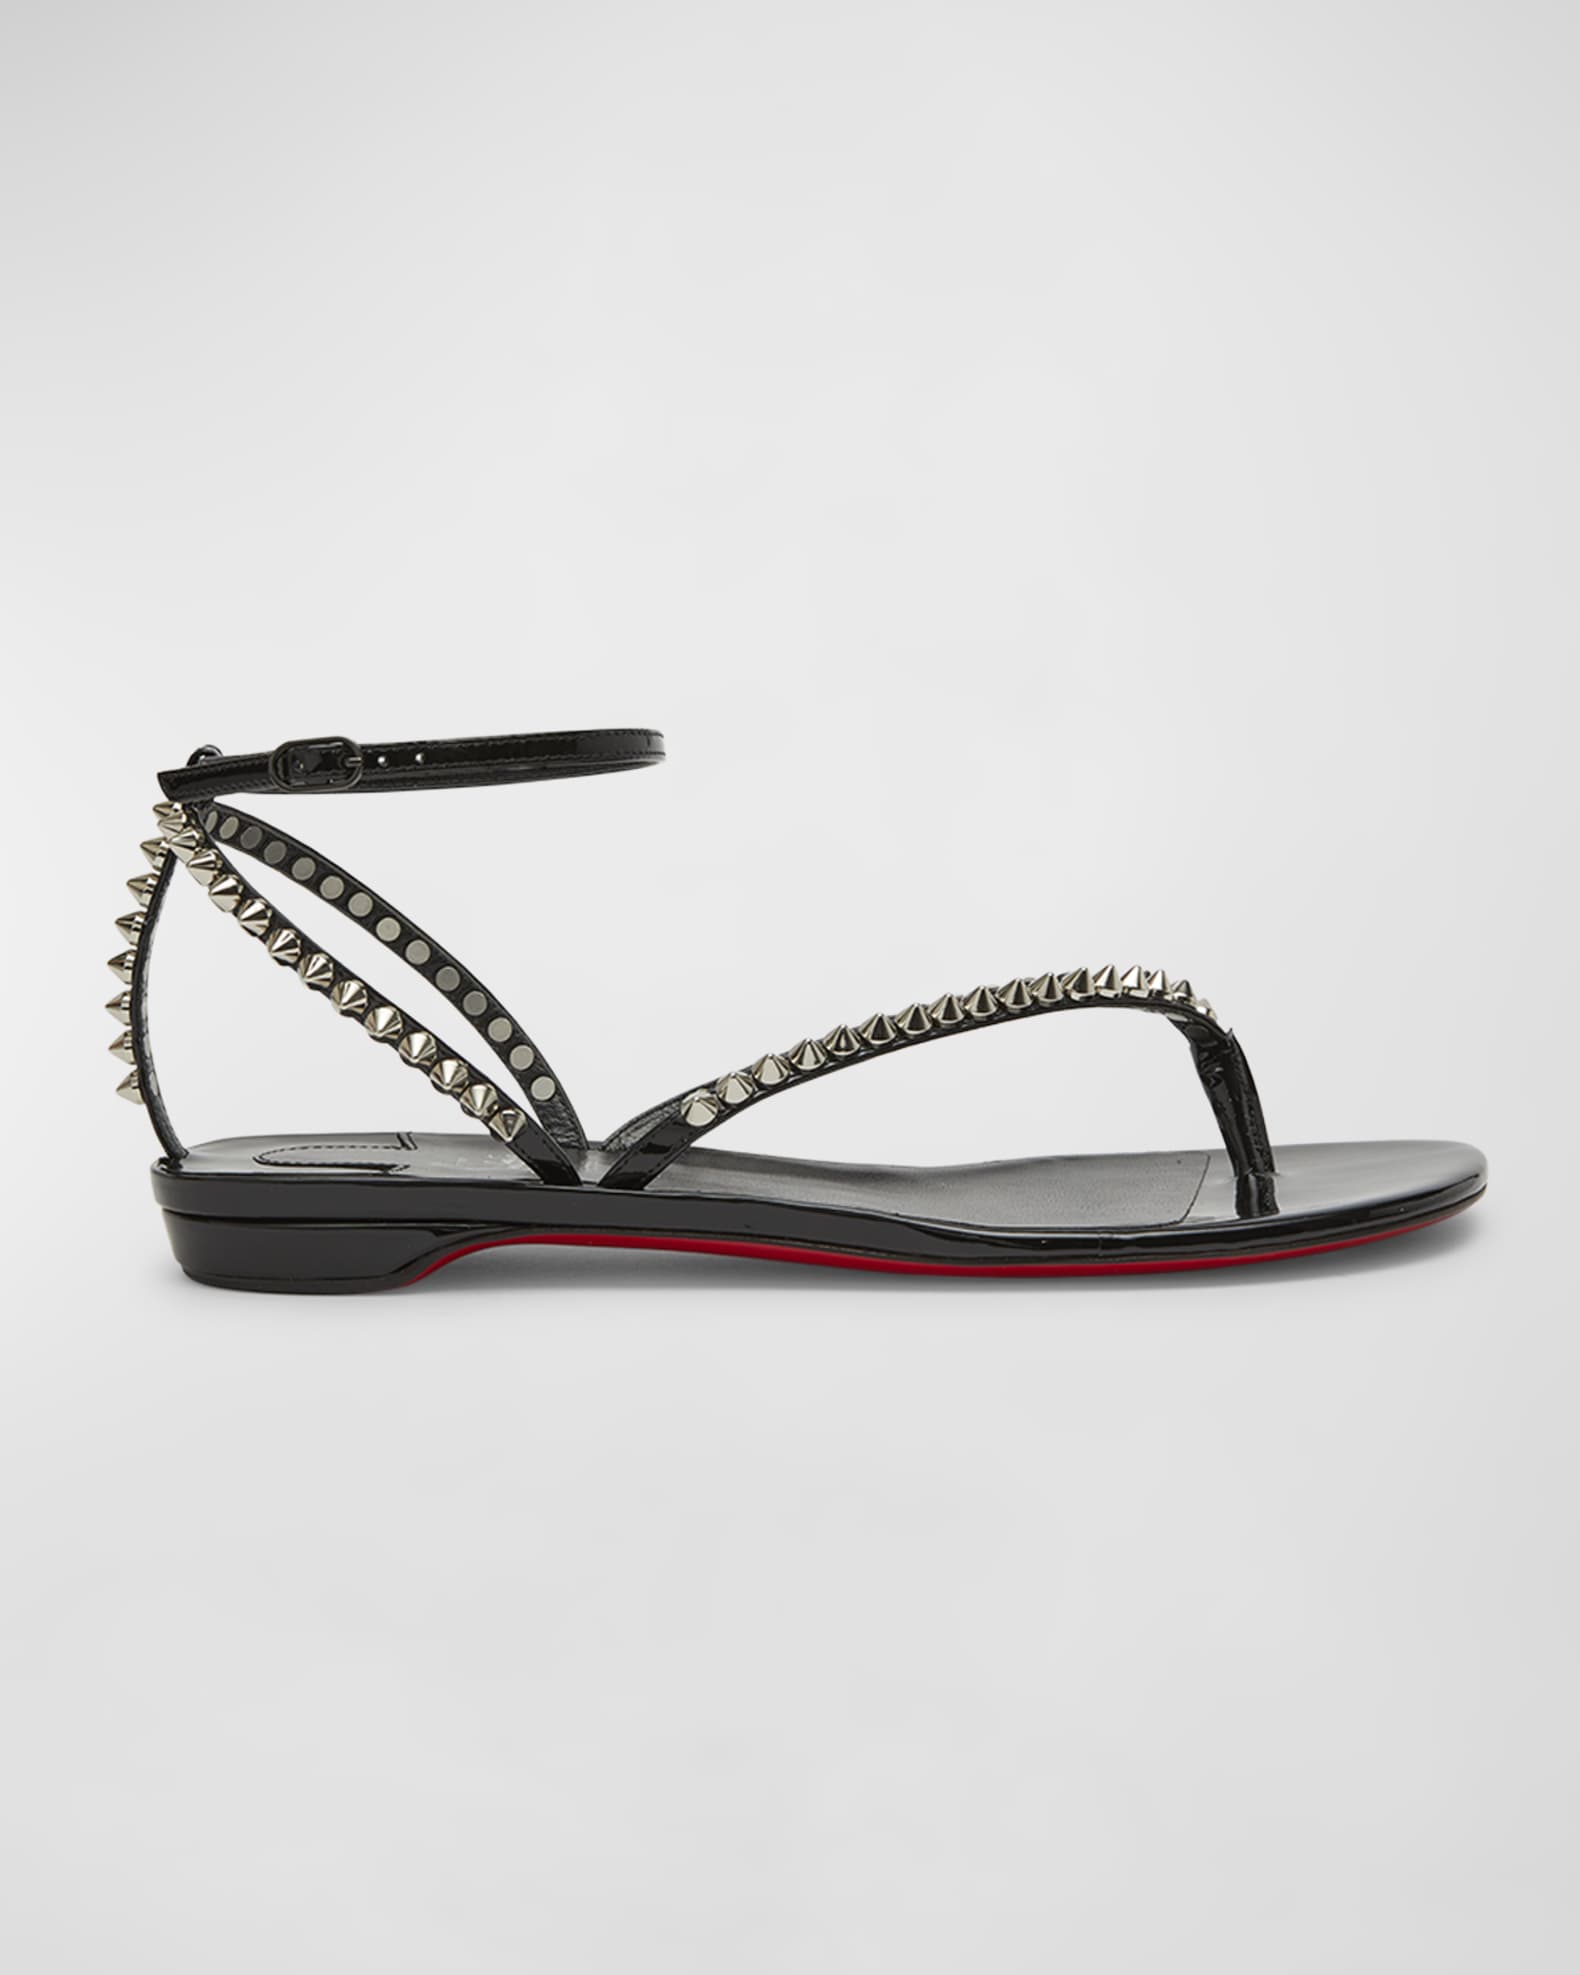 Christian Louboutin So Me Spike Red Sole Sandals  Louis vuitton shoes heels,  Christian louboutin heels, Christian louboutin